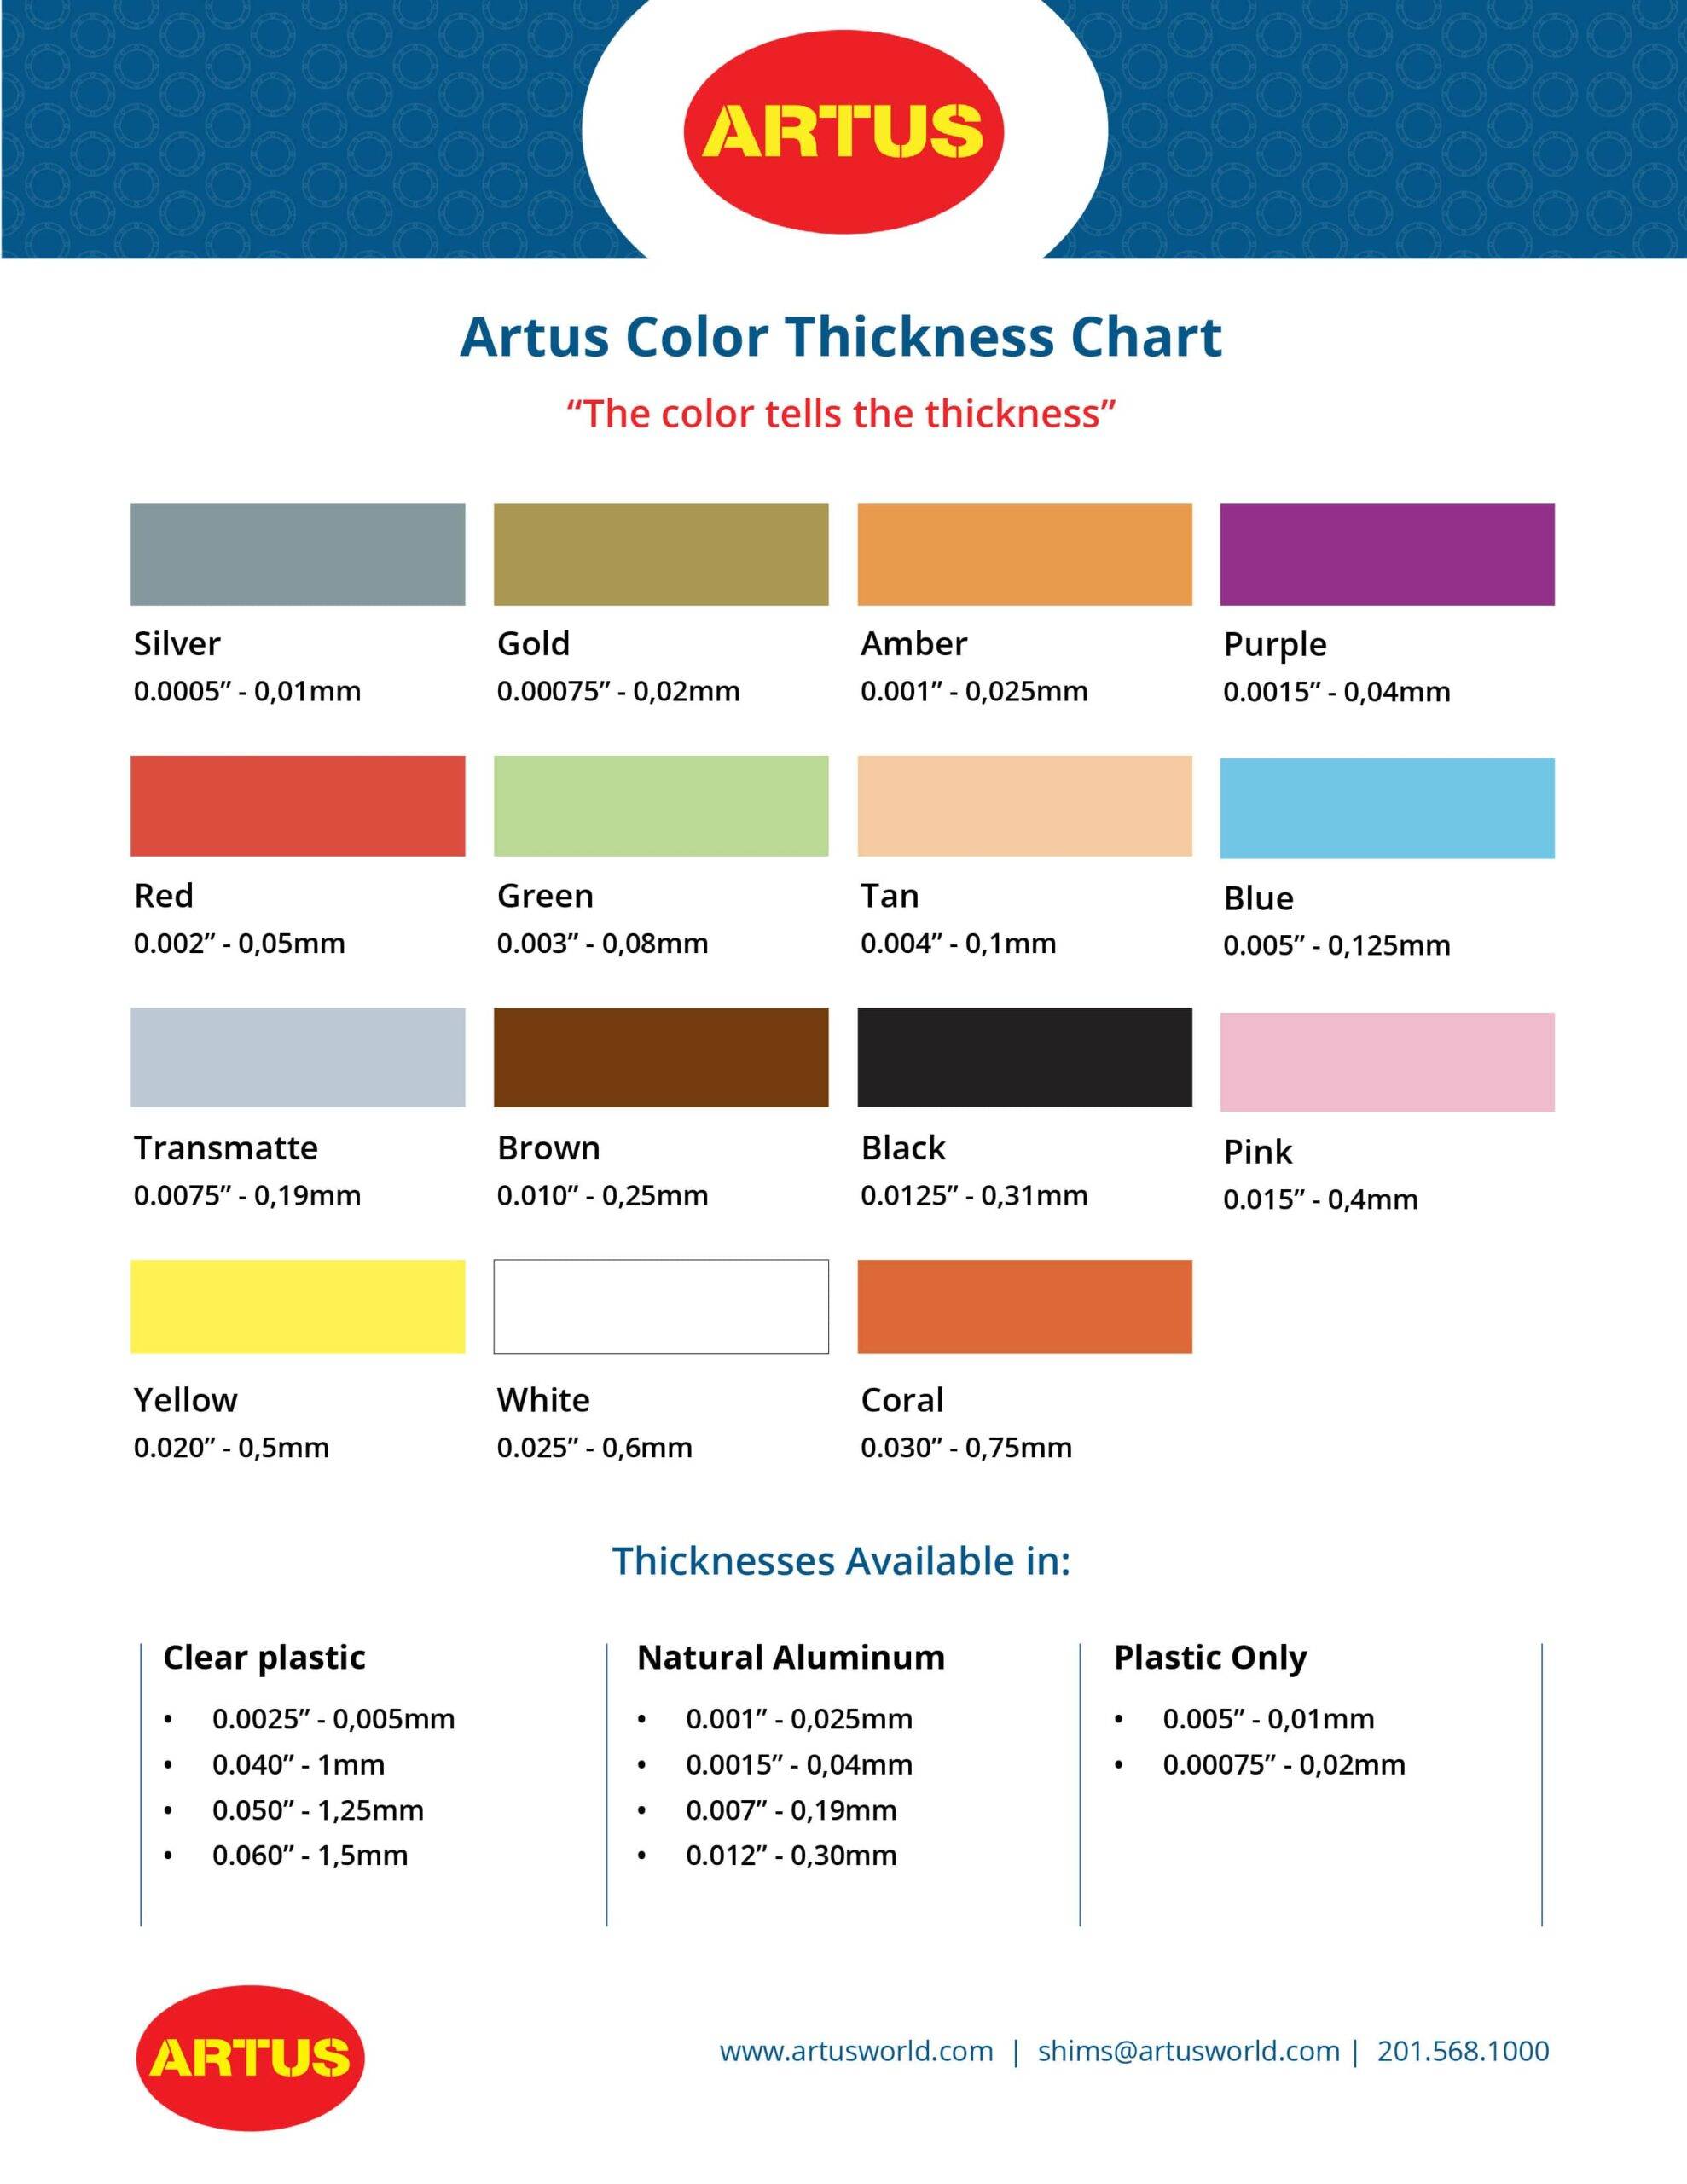 Available shim color and thickness chart